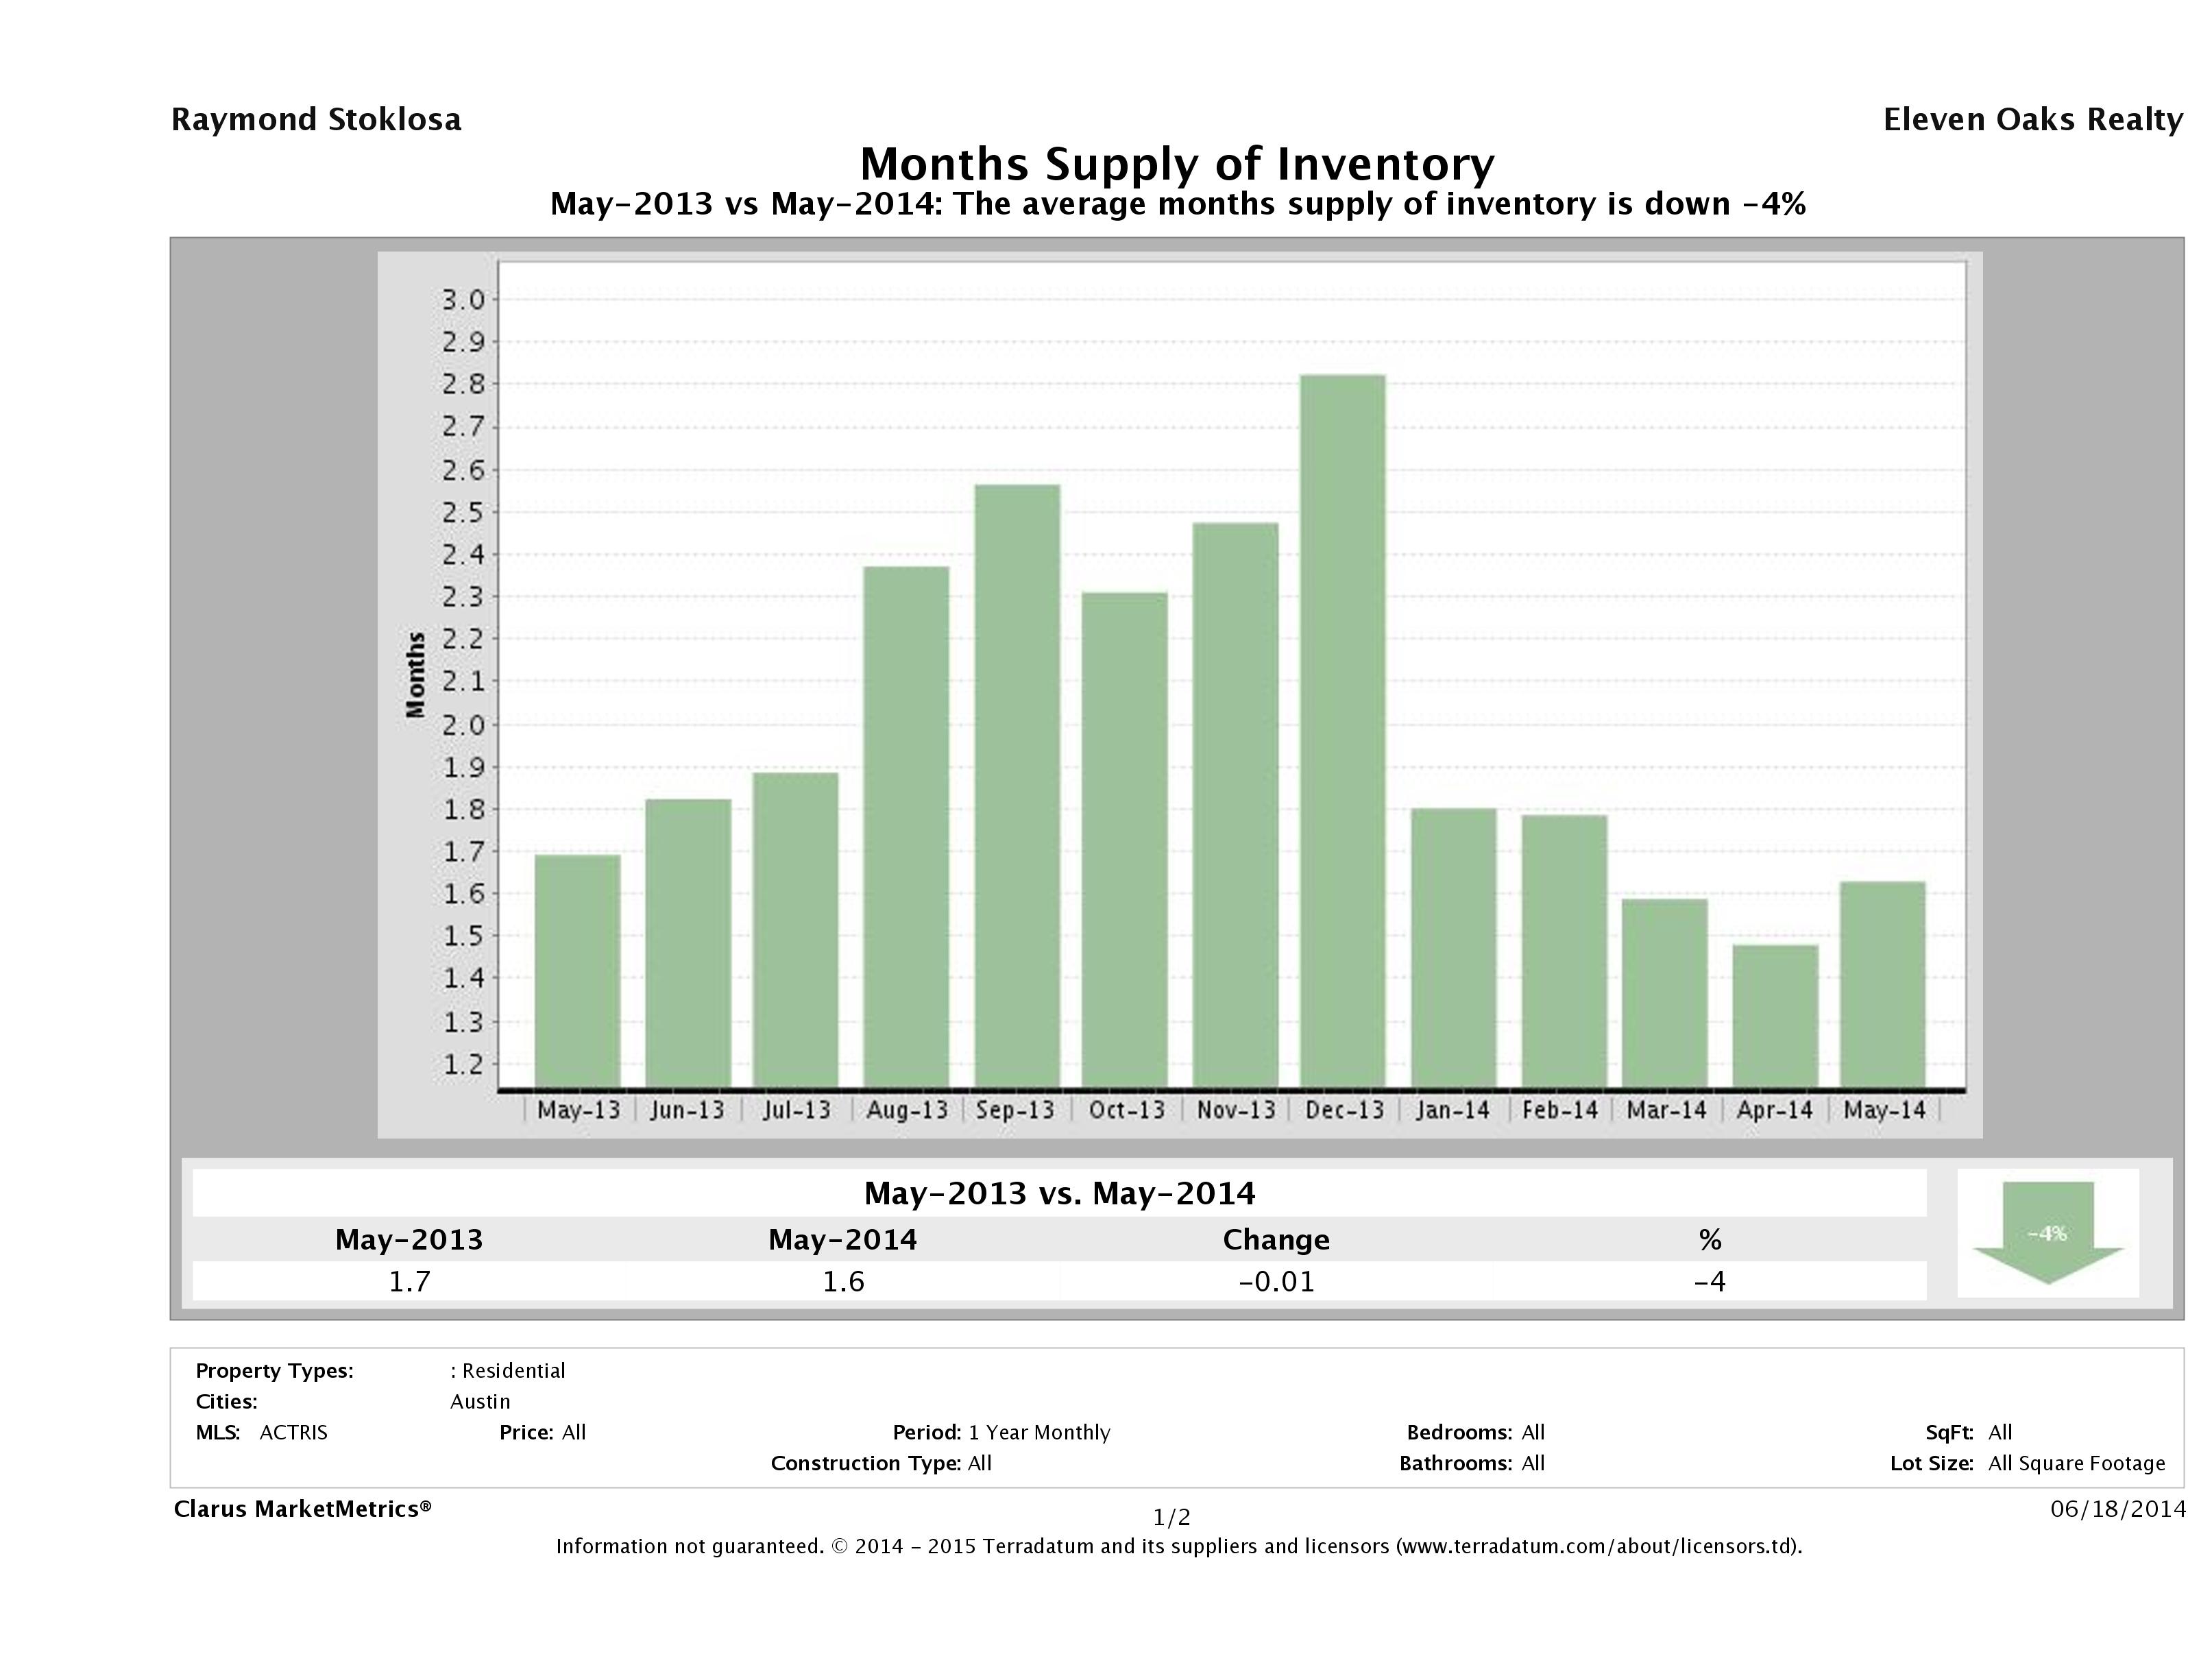 Austin single family home months inventory May 2014